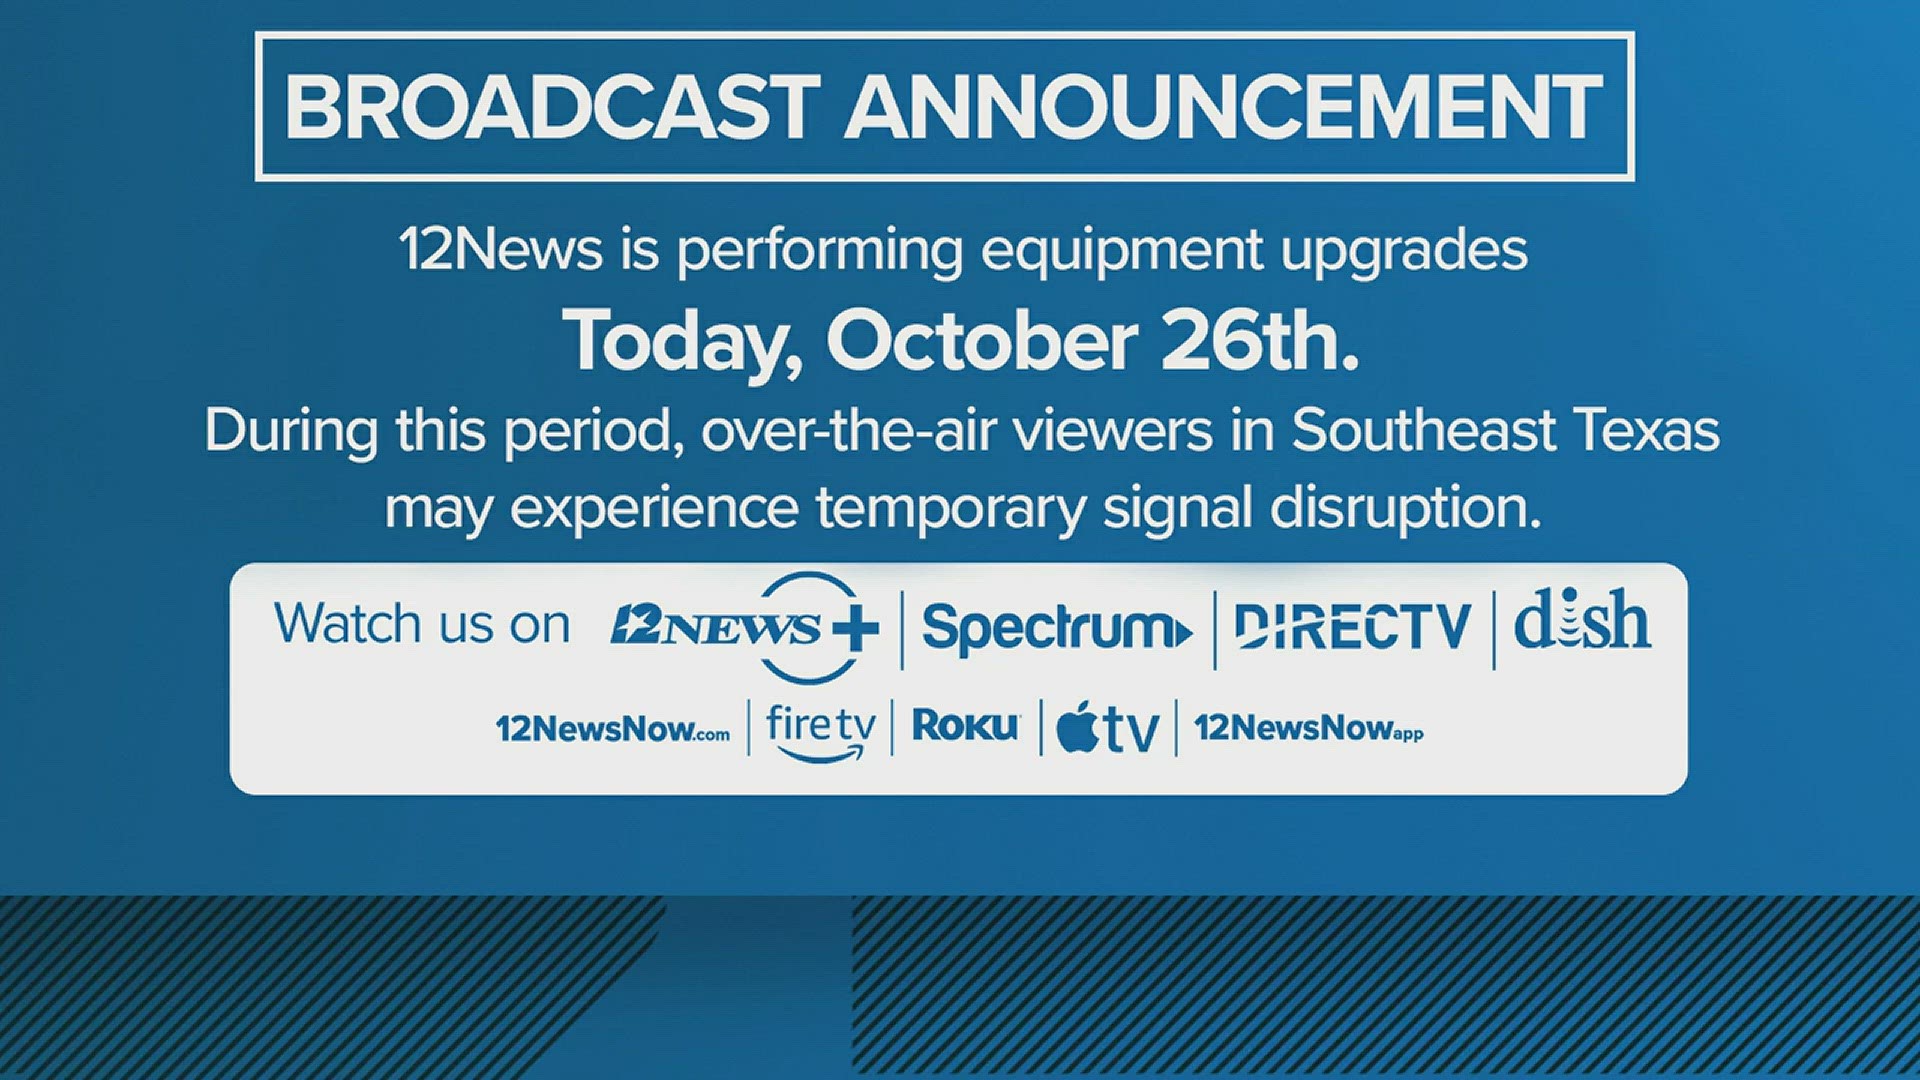 12News is making some transmitter upgrades on Thursday that may affect some of our over-the-air viewers.